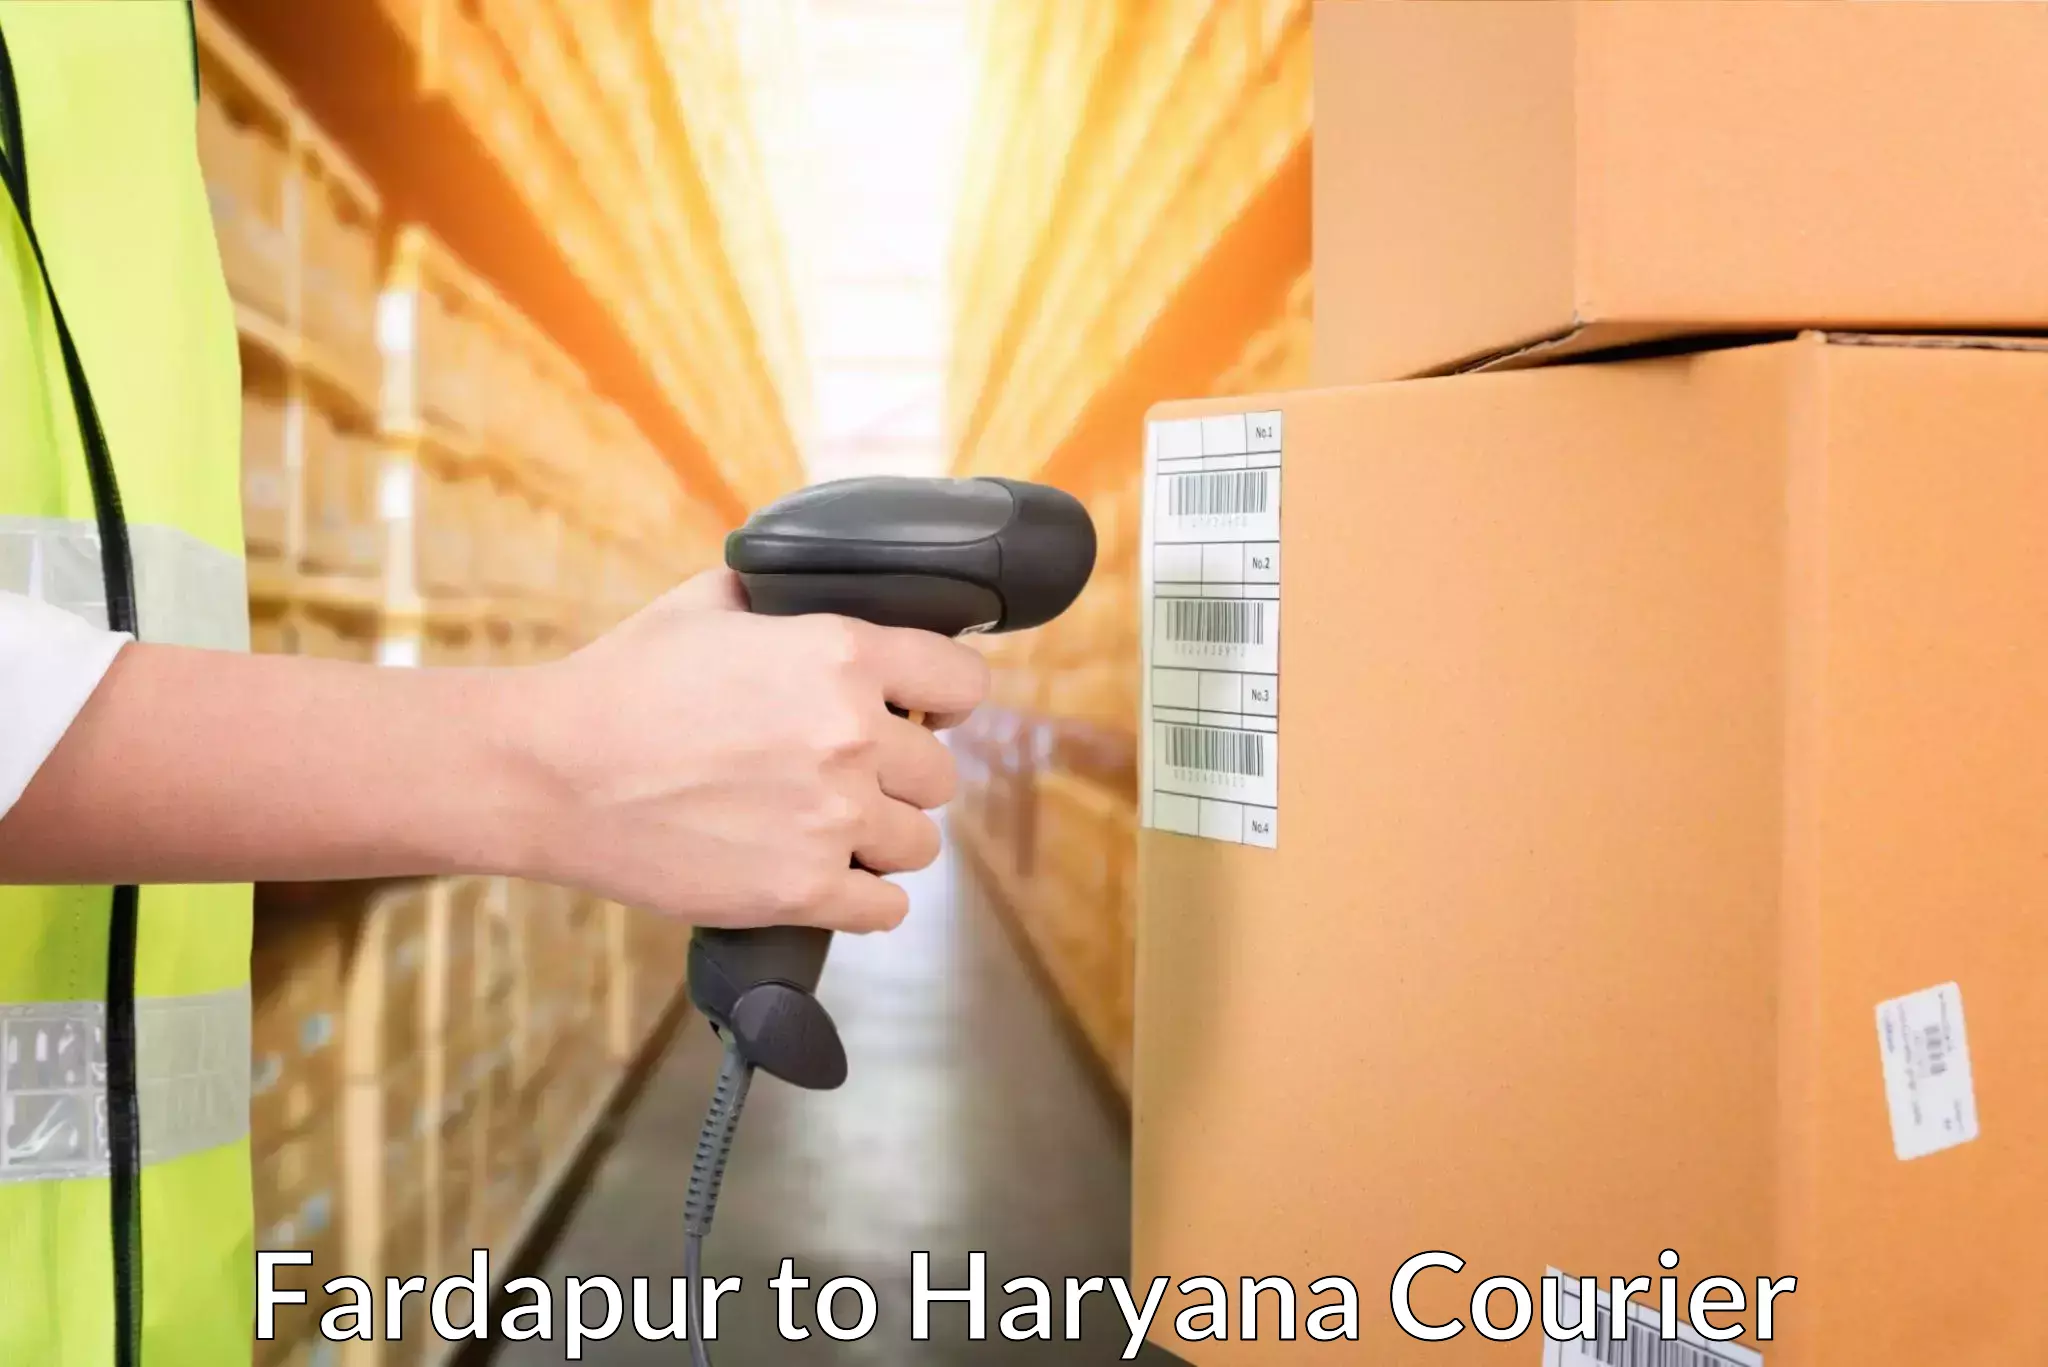 Reliable parcel services Fardapur to Jhajjar